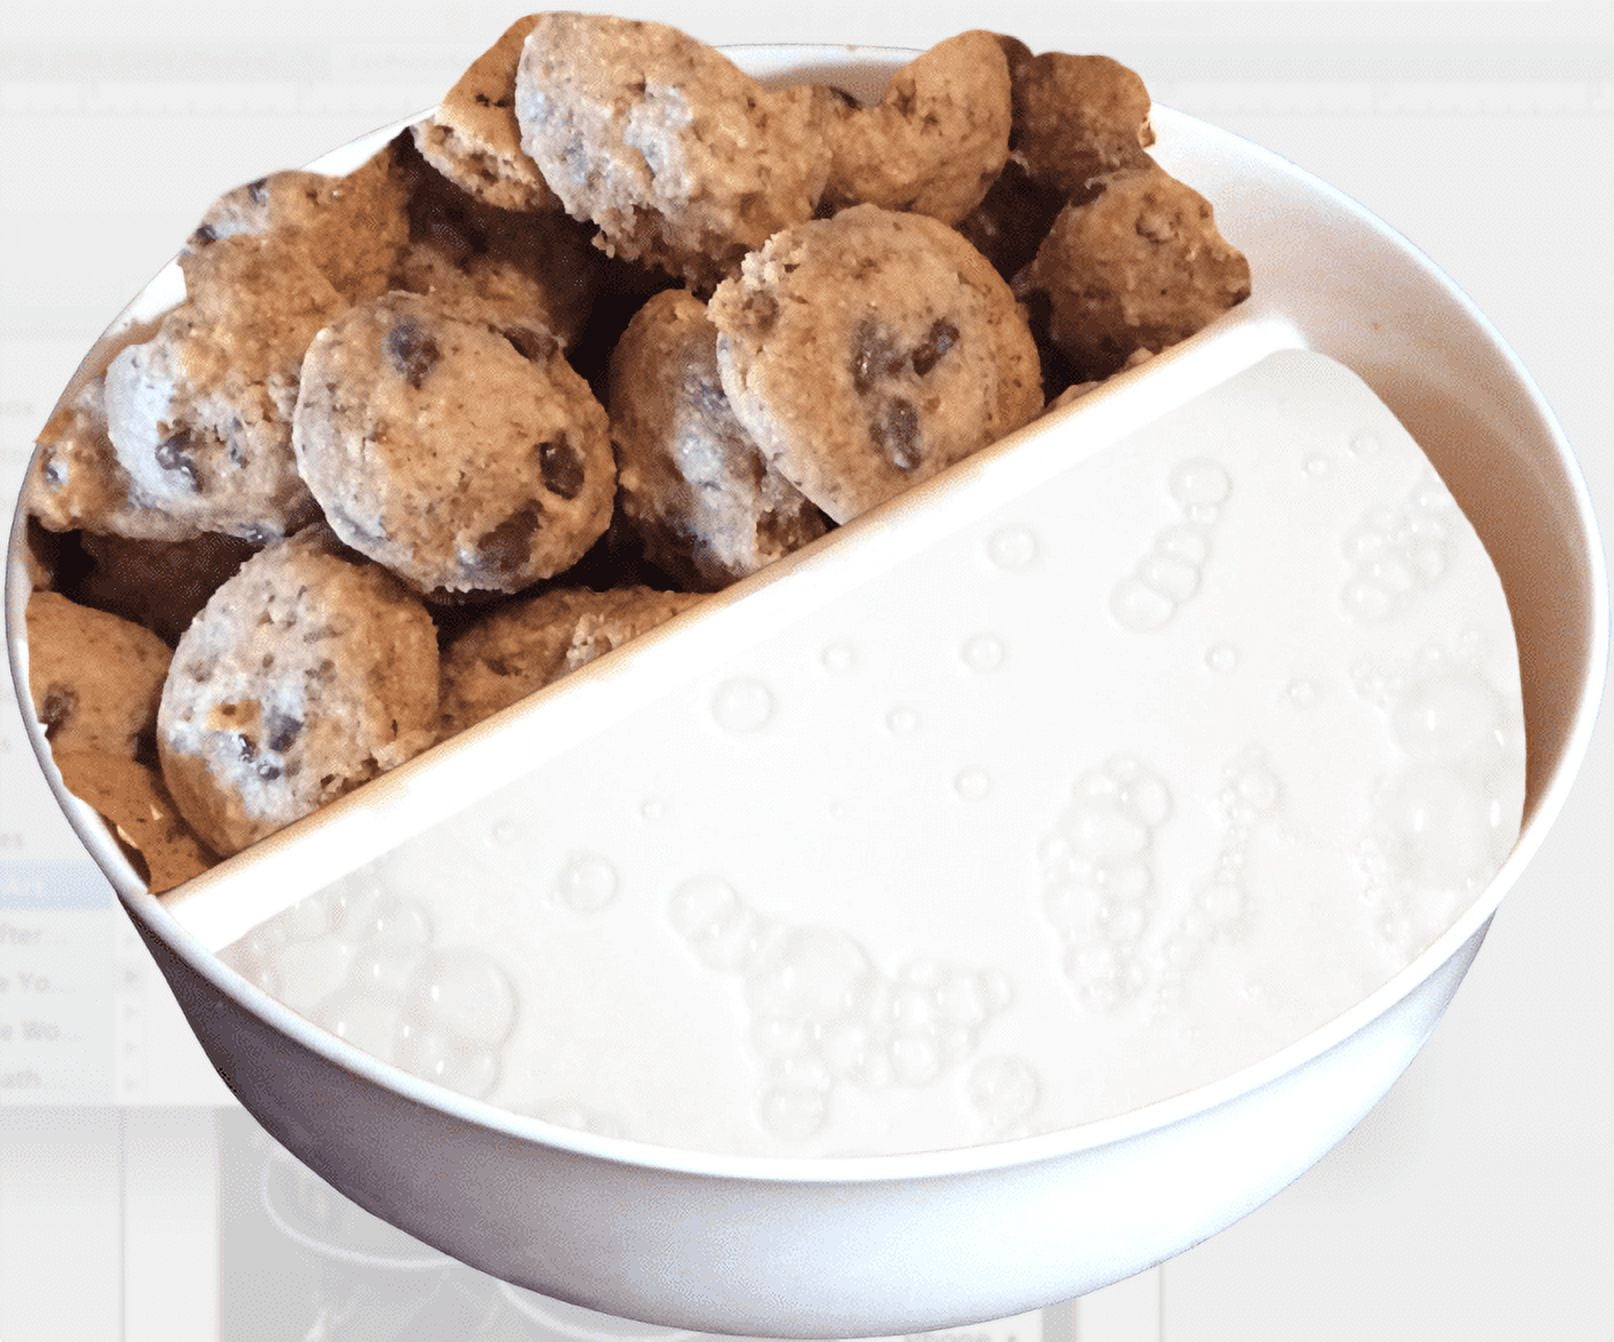 Just Crunch Anti-Soggy Cereal Bowl - Bpa-Free Divided Bowls for